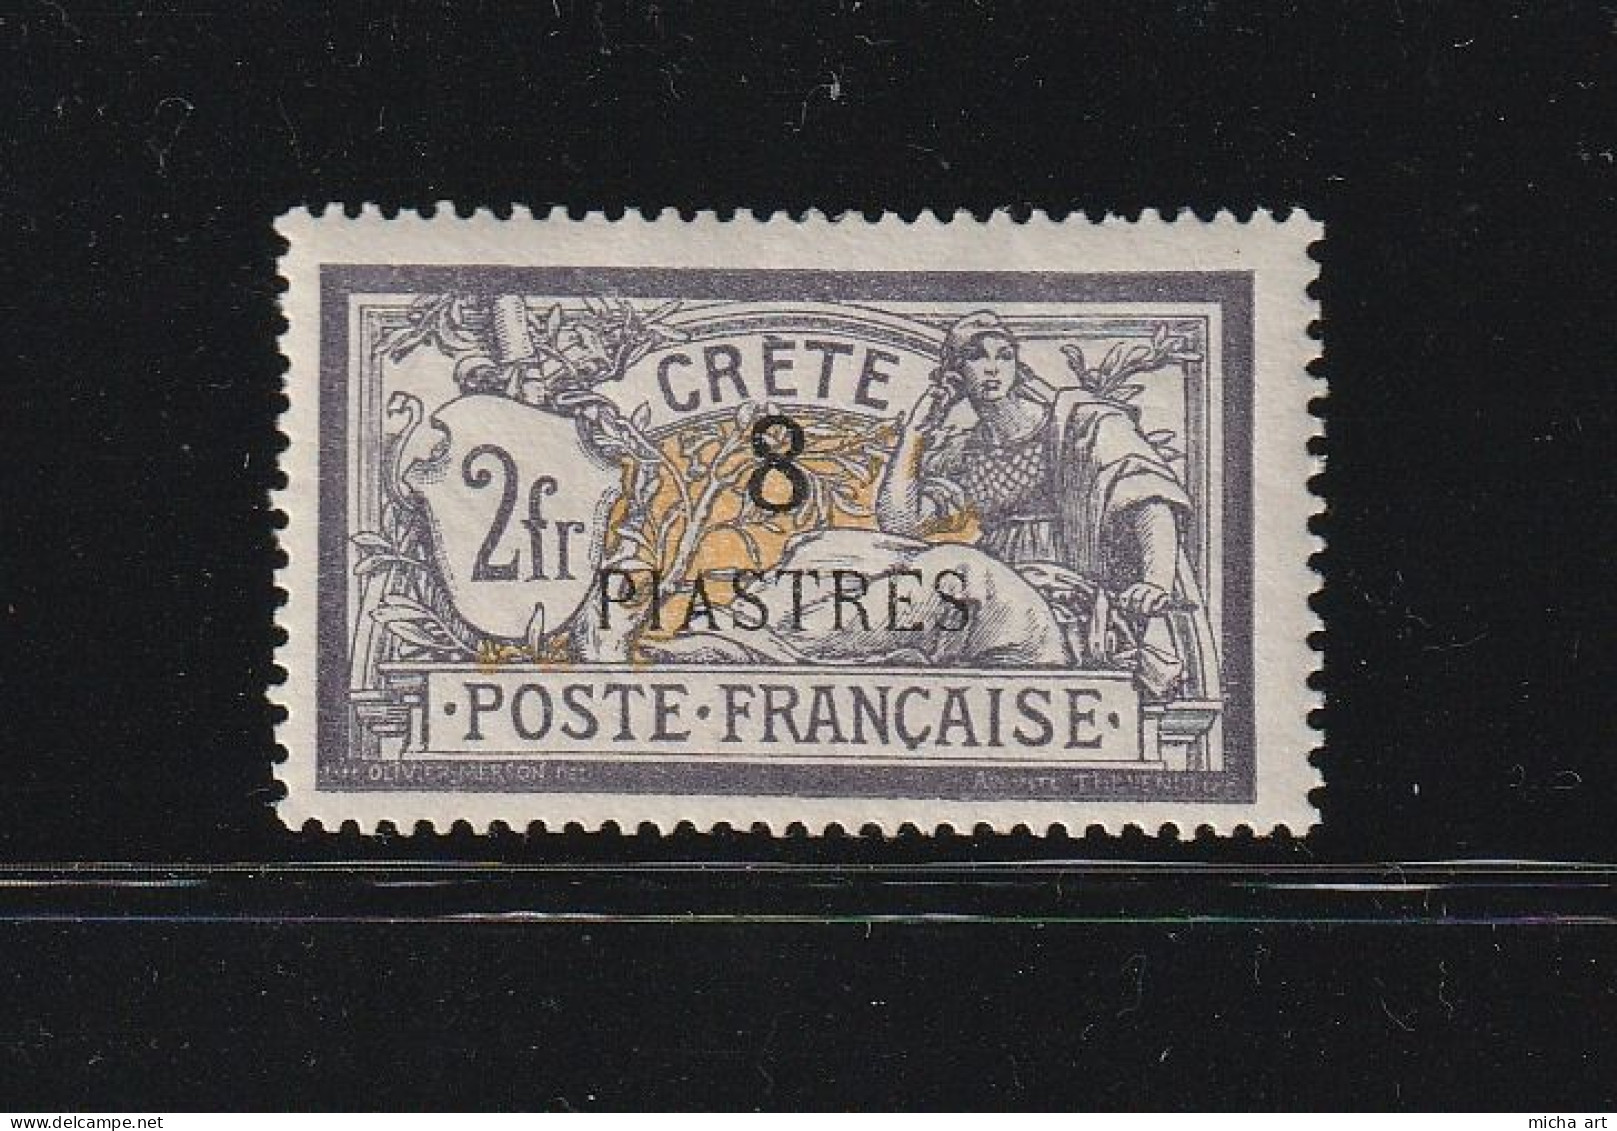 Greece Crete French Post Office 1903 Surcharged Crete Issue 8 Pi / 2 Fr. MH W1097 - Ongebruikt